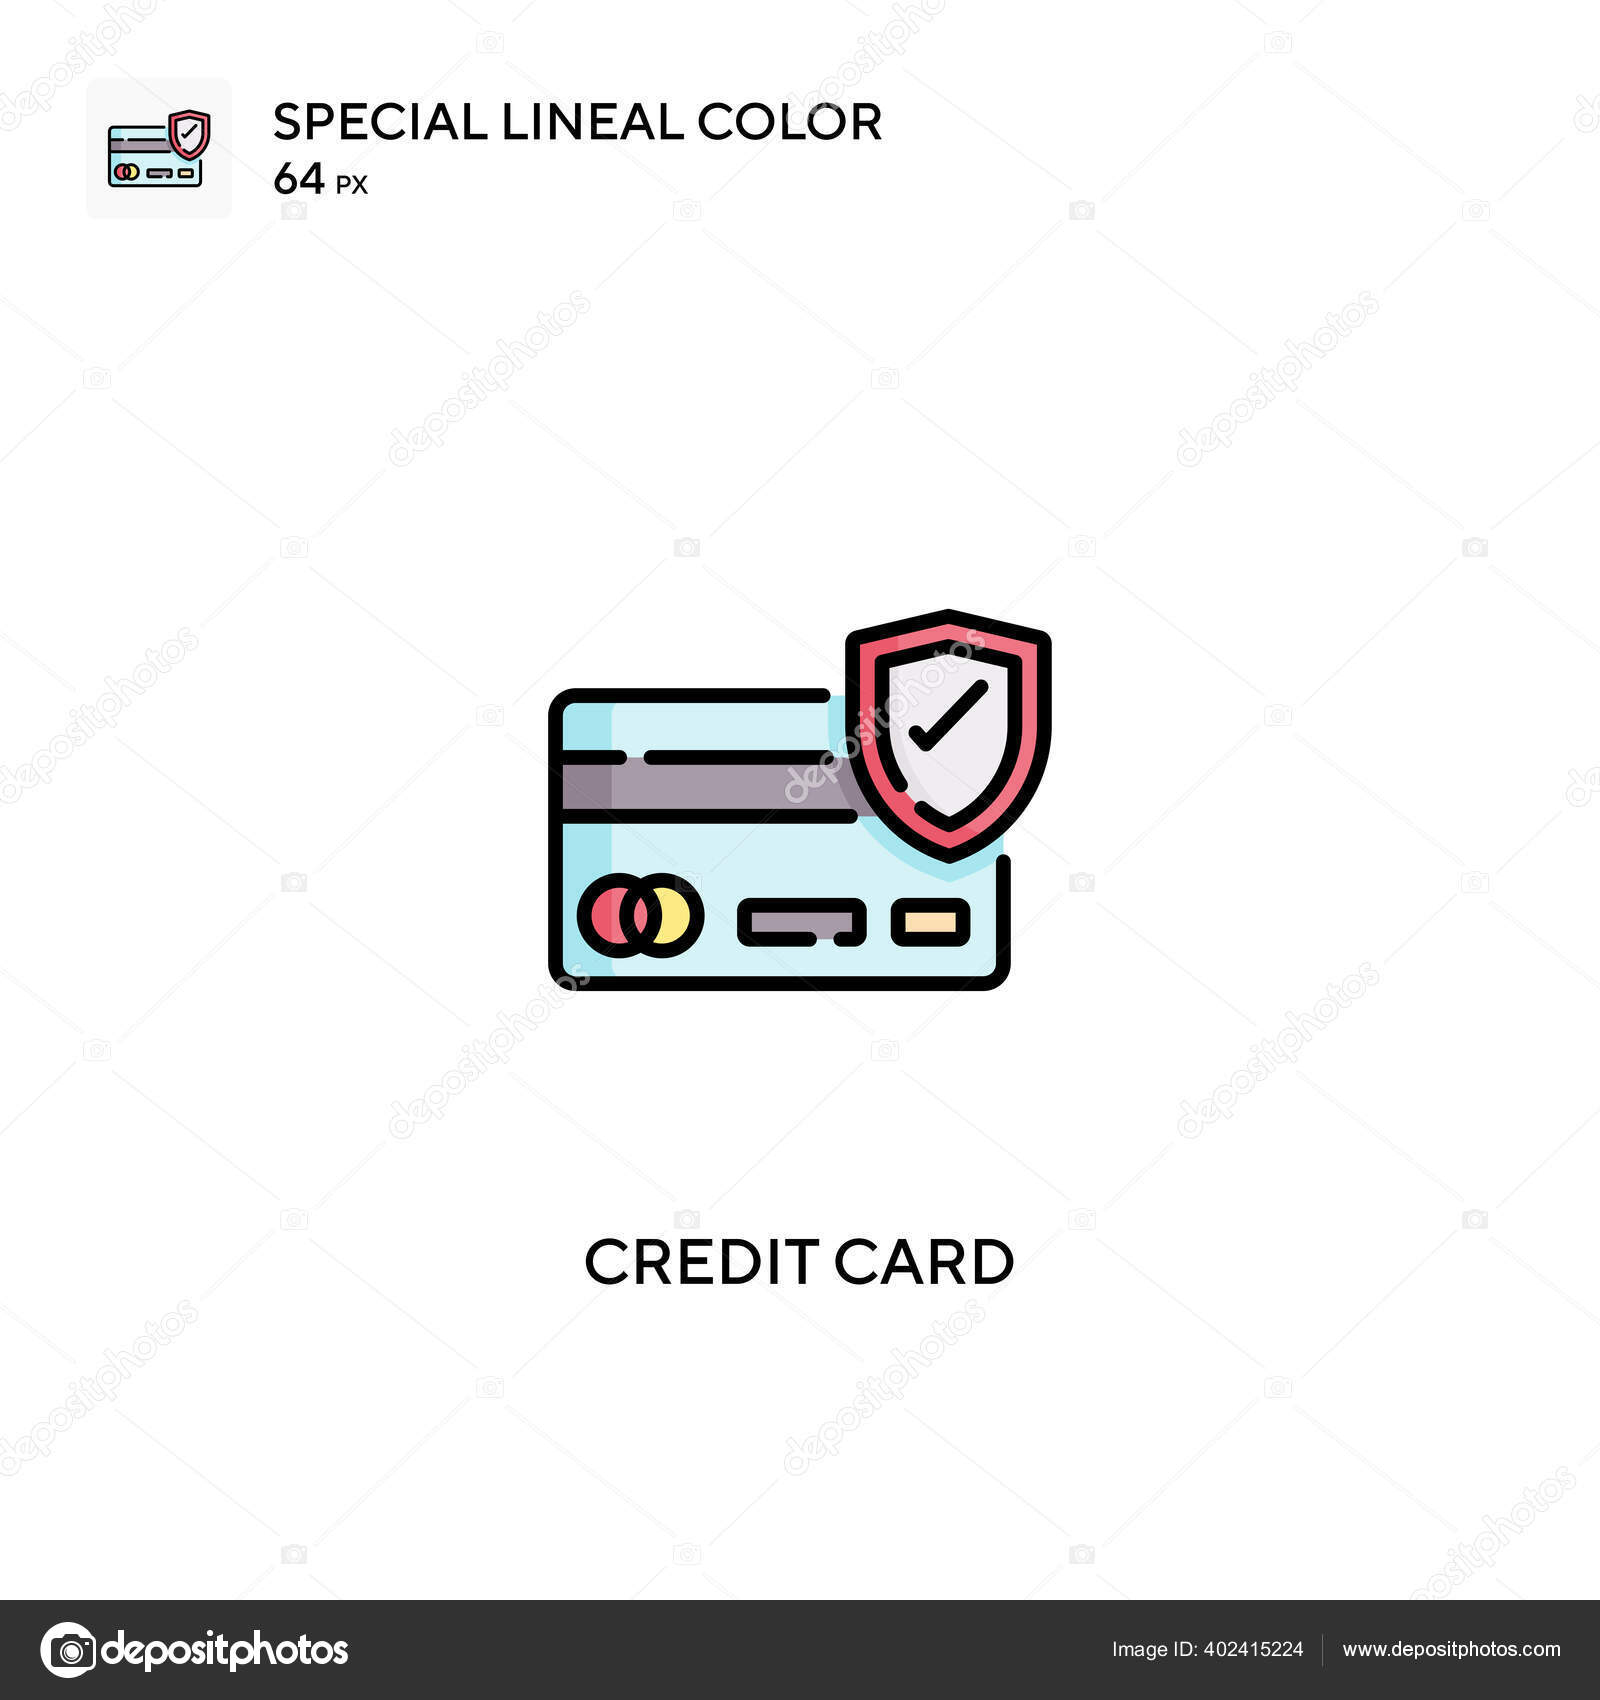 Finish Special Lineal color icon